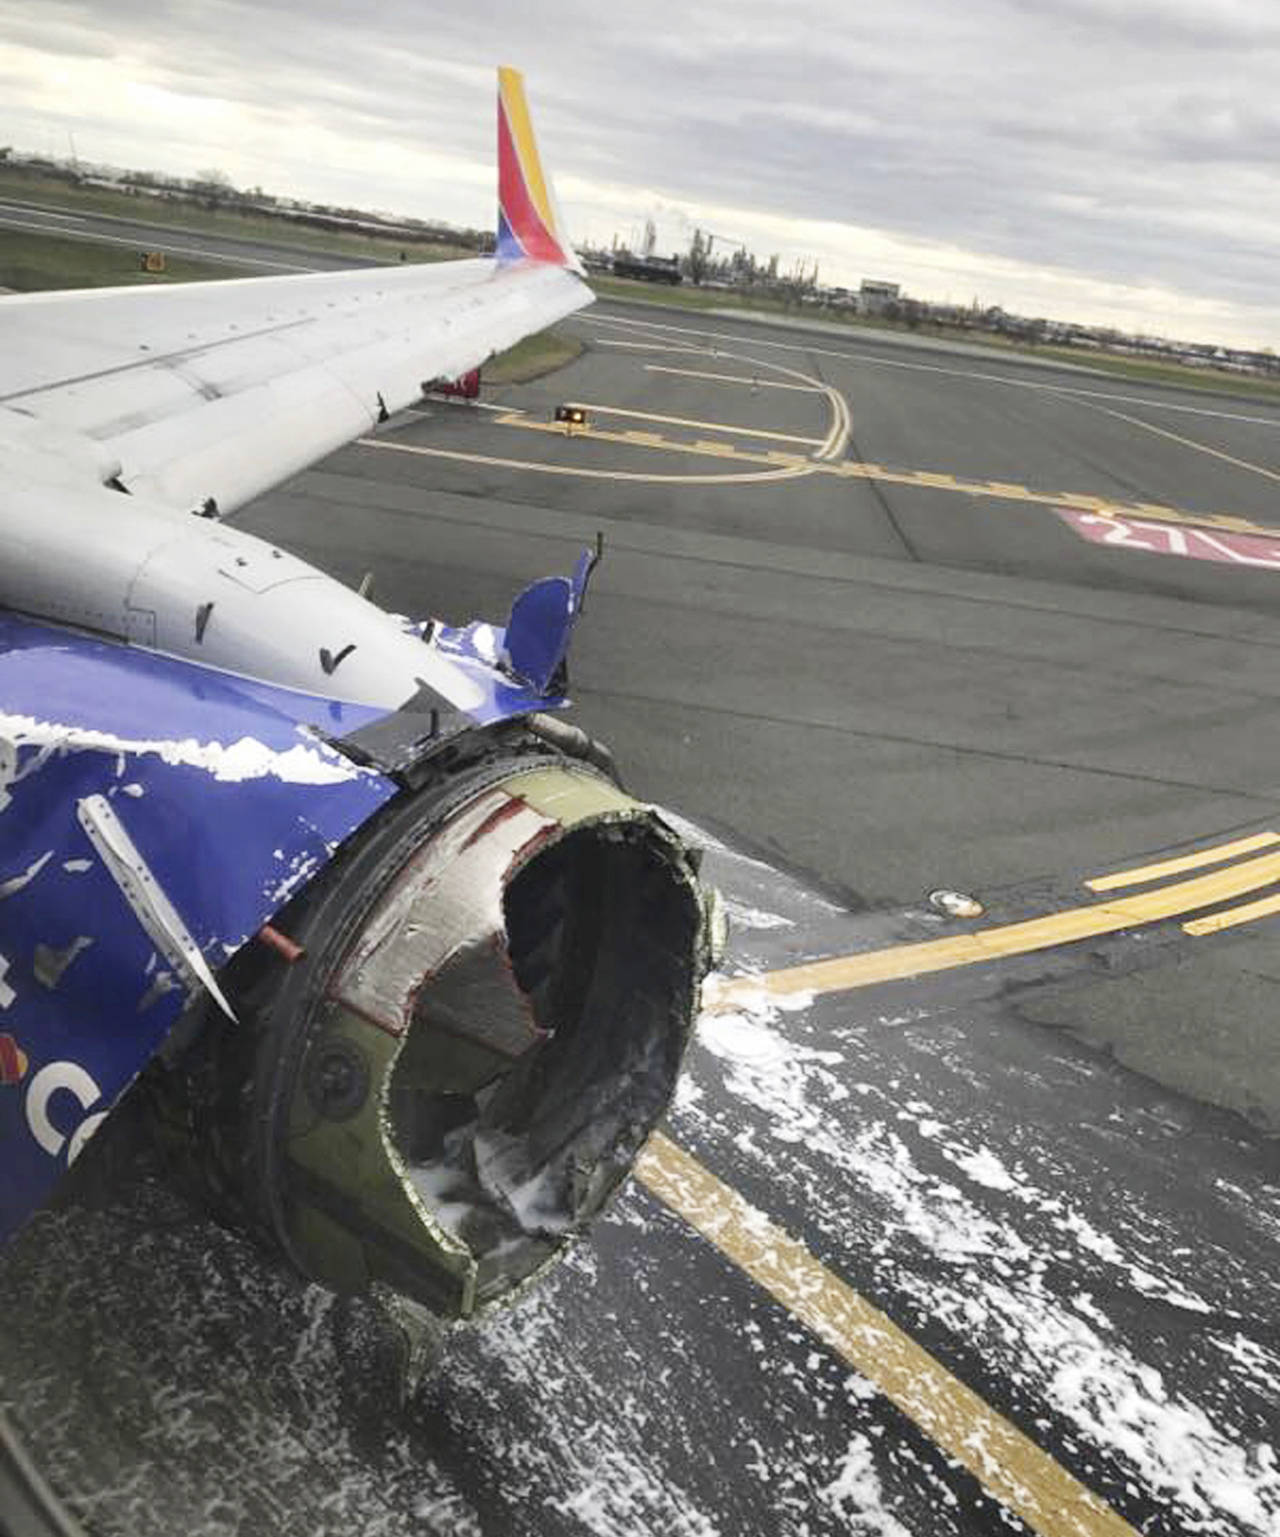 This April 17 photo shows the jet engine casing of a Southwest Airlines airplane after pilots of the twin-engine Boeing 737 bound from New York to Dallas with 149 people aboard took it into a rapid descent and made an emergency landing in Philadelphia. (Marty Martinez via AP)